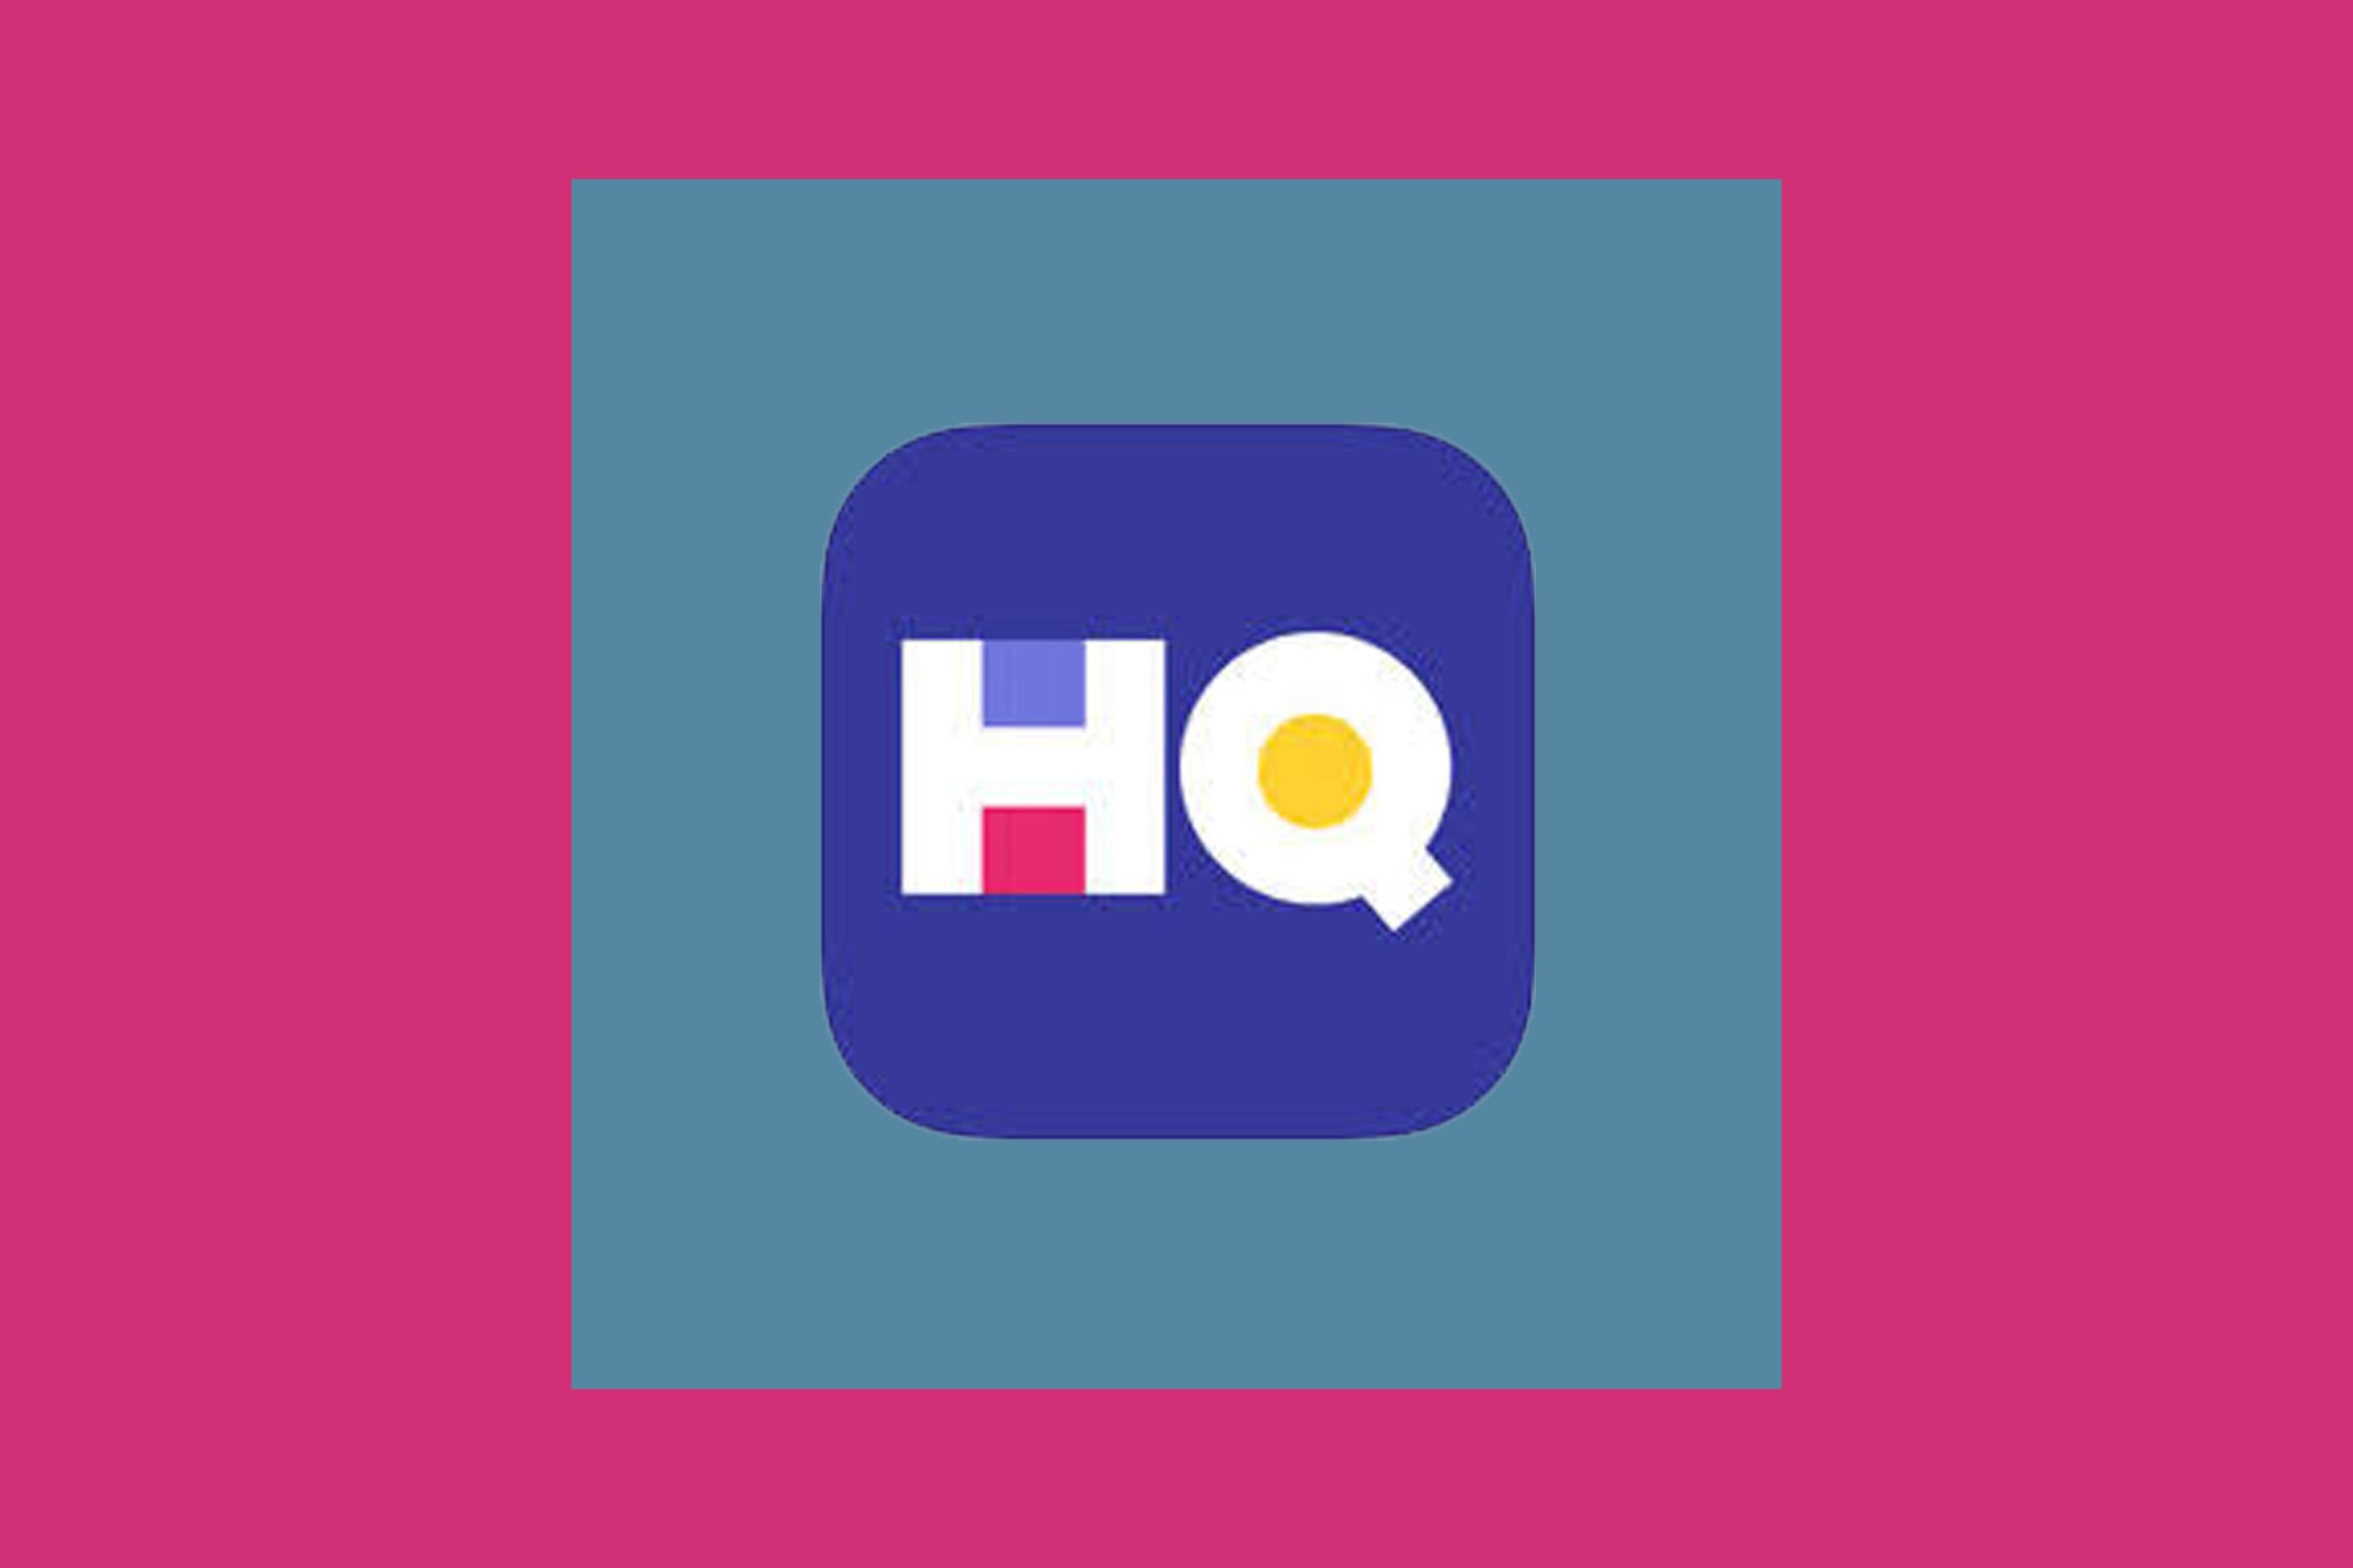 HQ Trivia is one of the top 10 apps of 2017